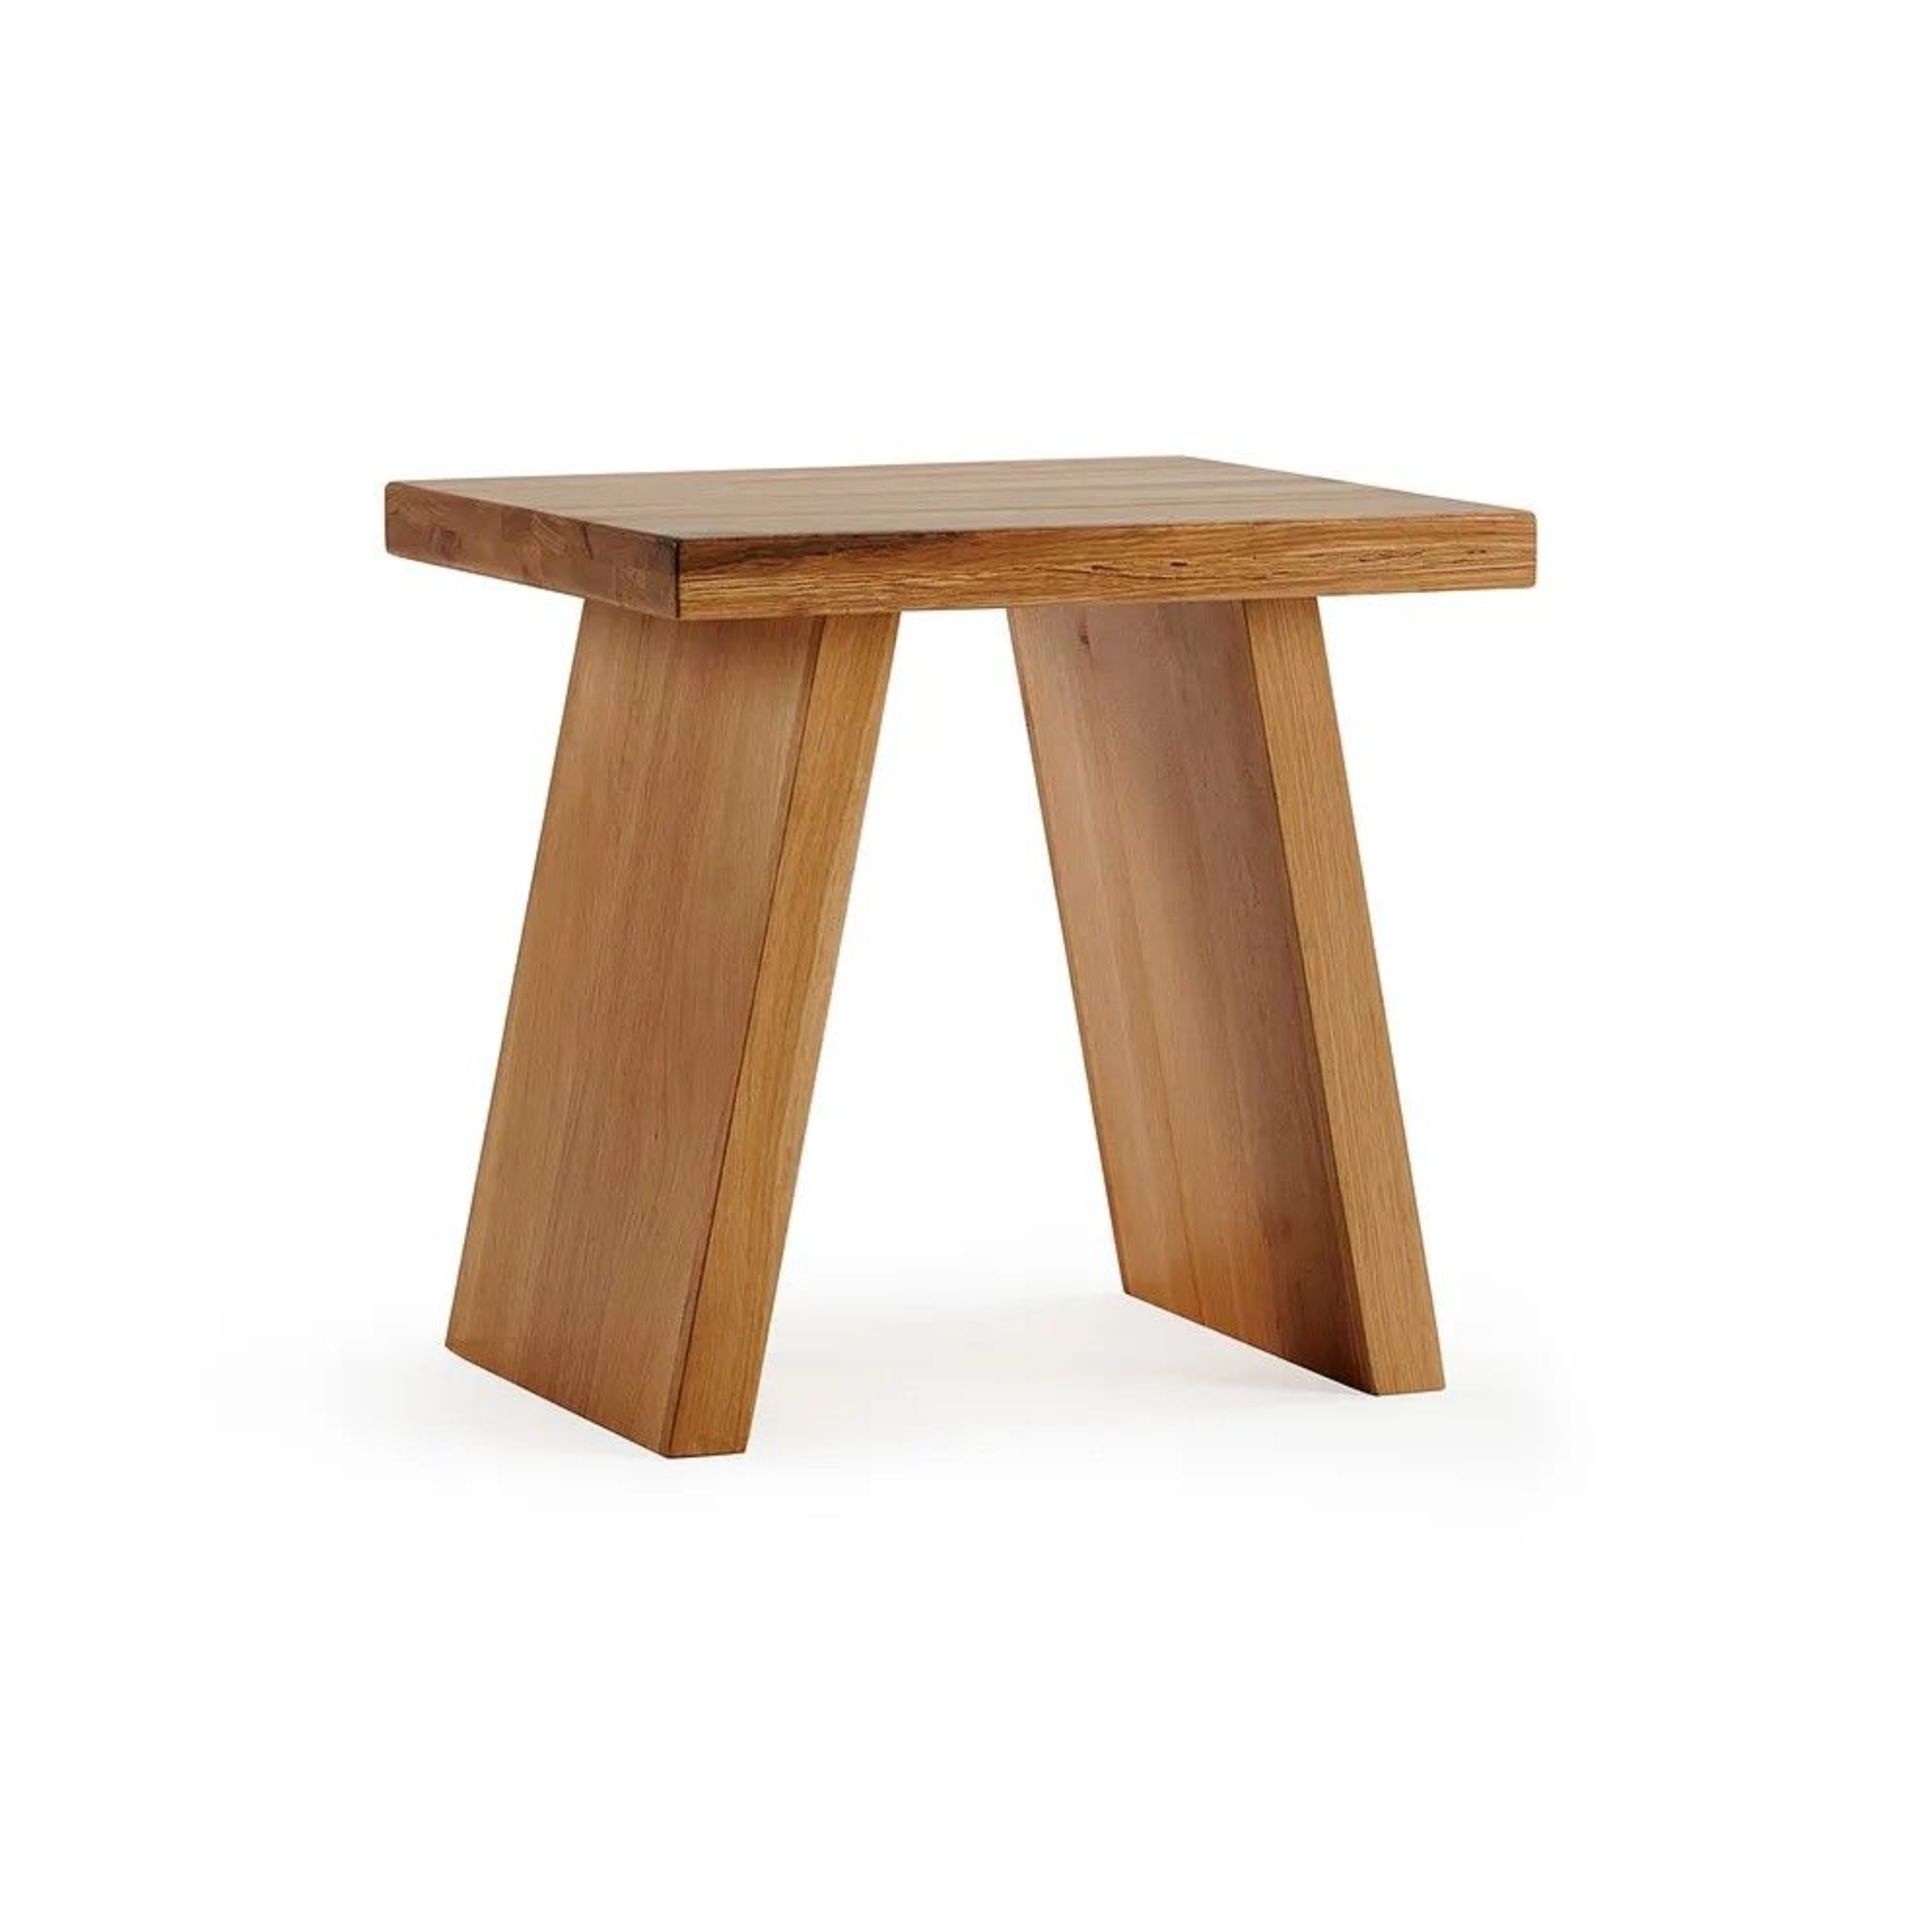 NEW BOXED Natural Solid Oak Stool. RRP £130 (NCH001STN) For a more open seating environment in the - Image 2 of 2